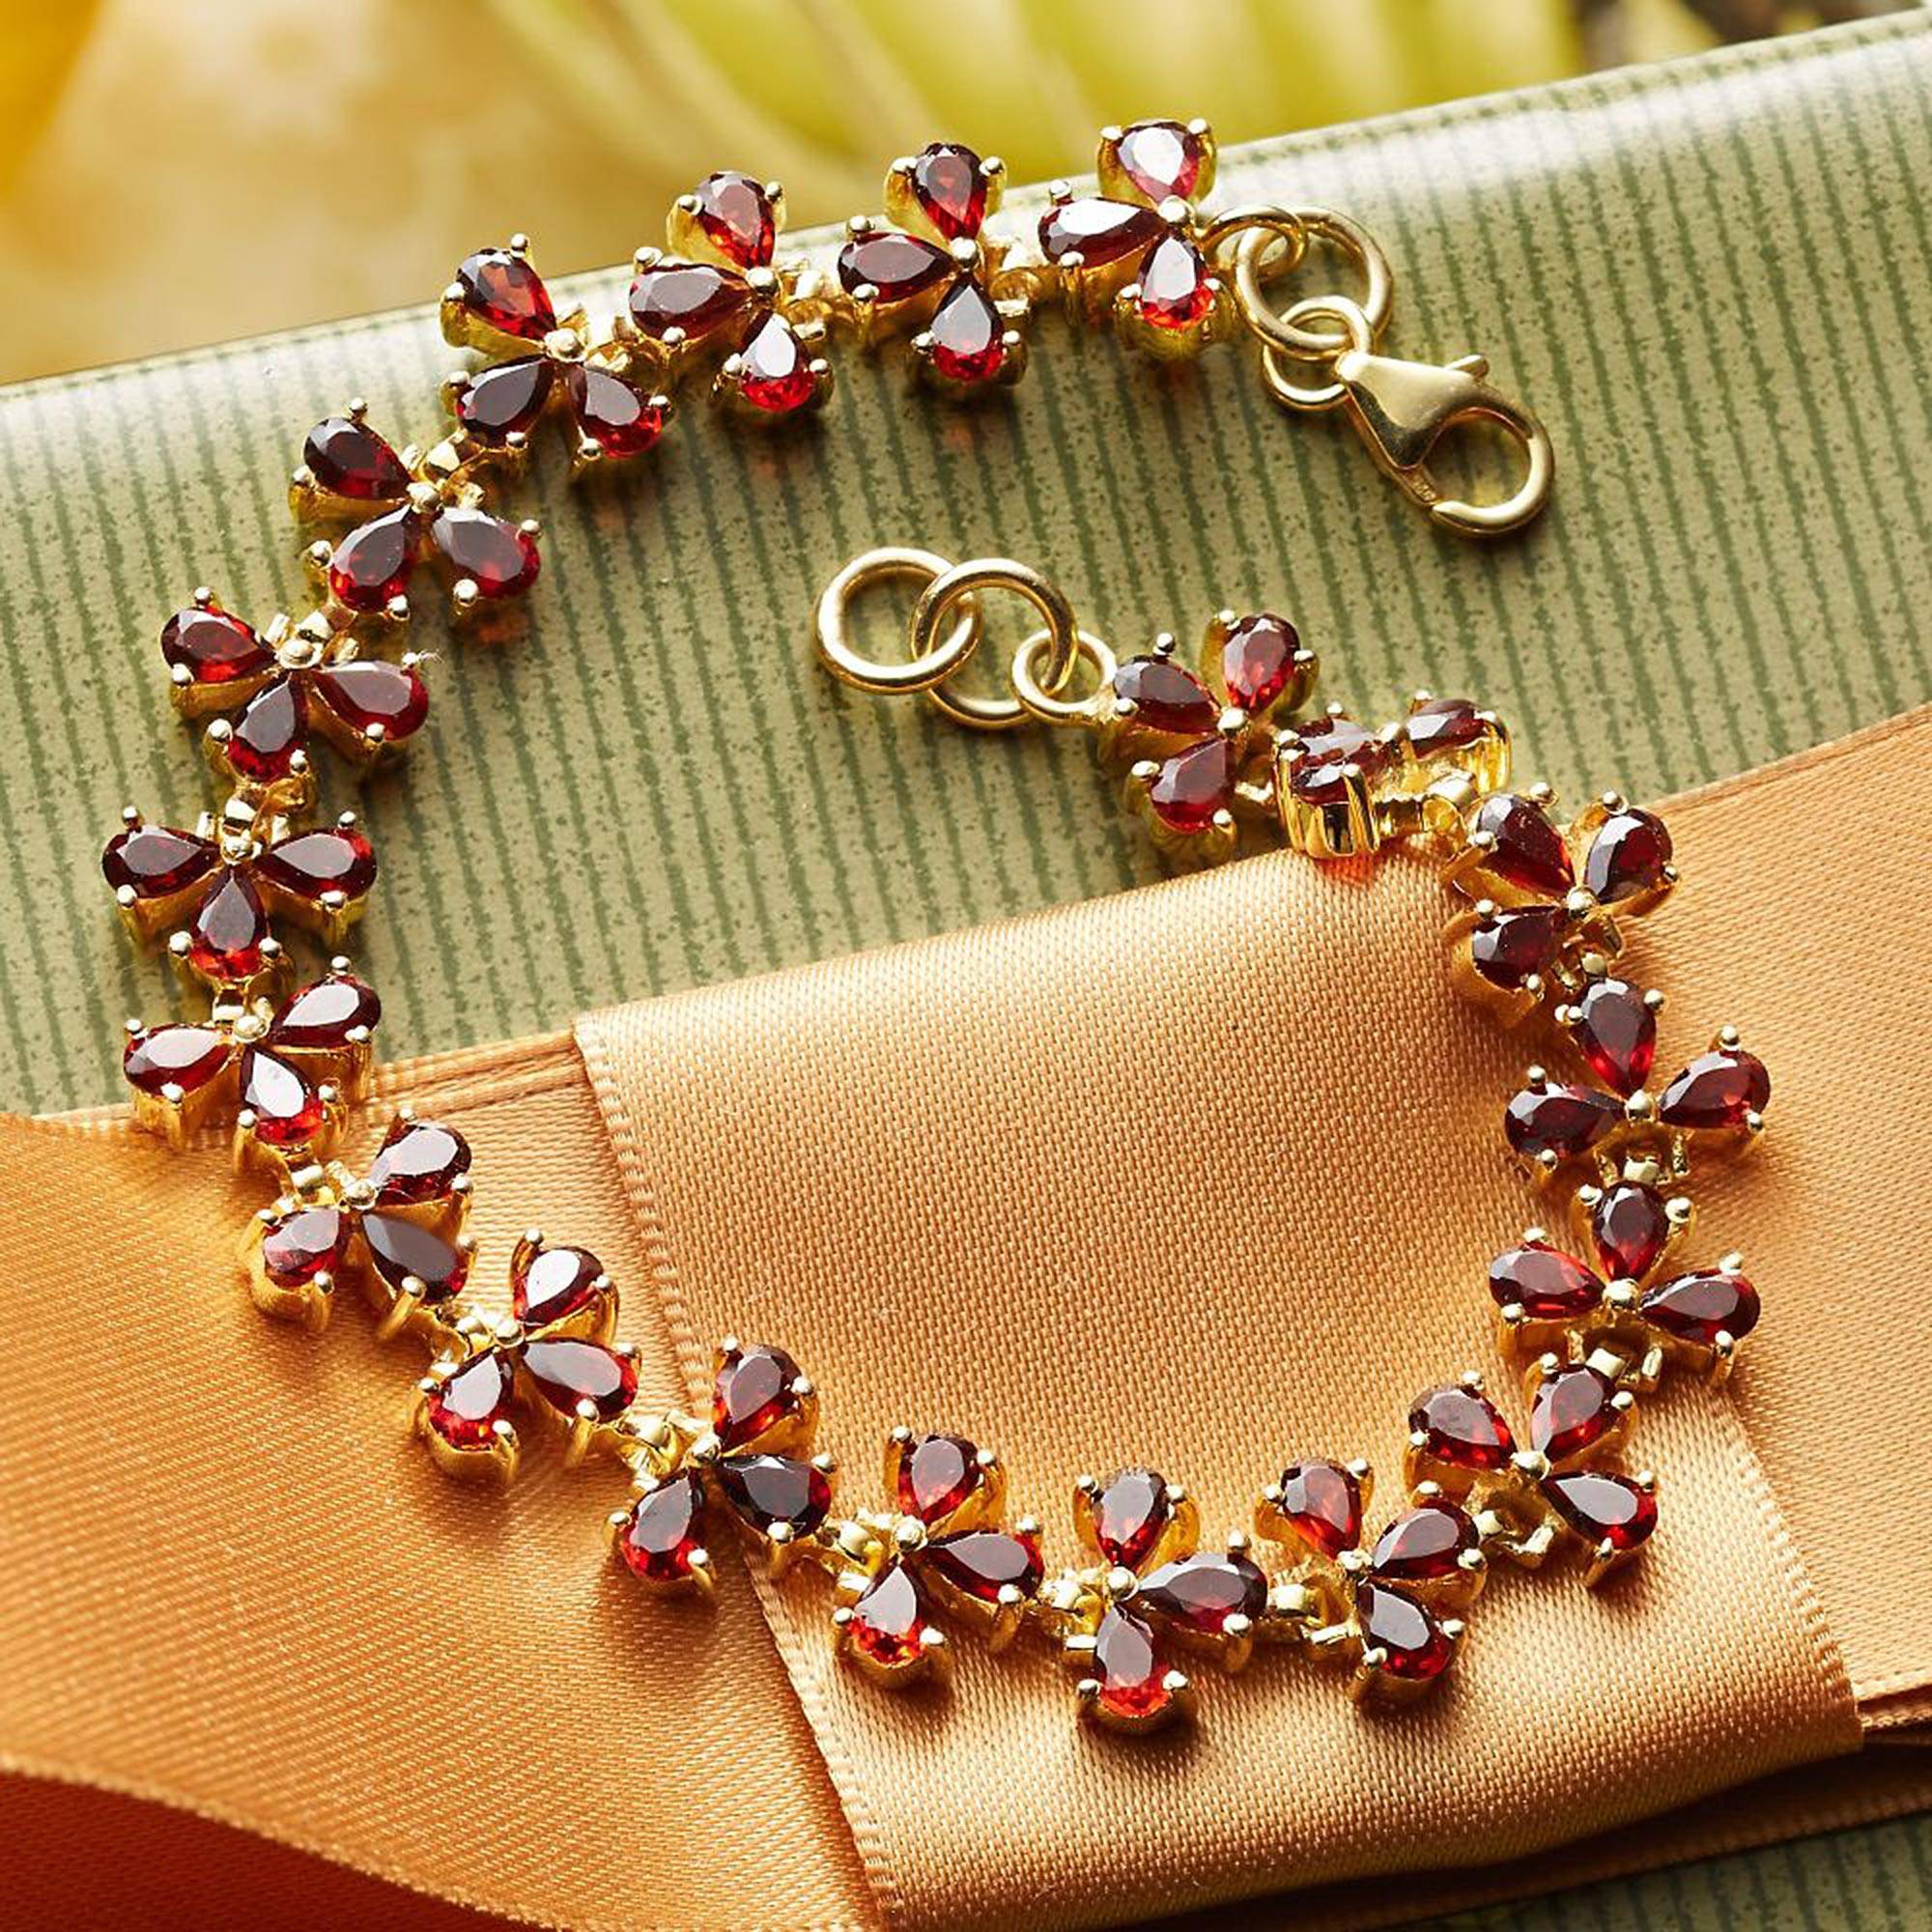 Handcrafted Gold Vermeil and Garnet Bracelet, 'Petals' Jewelry gift ideas for her